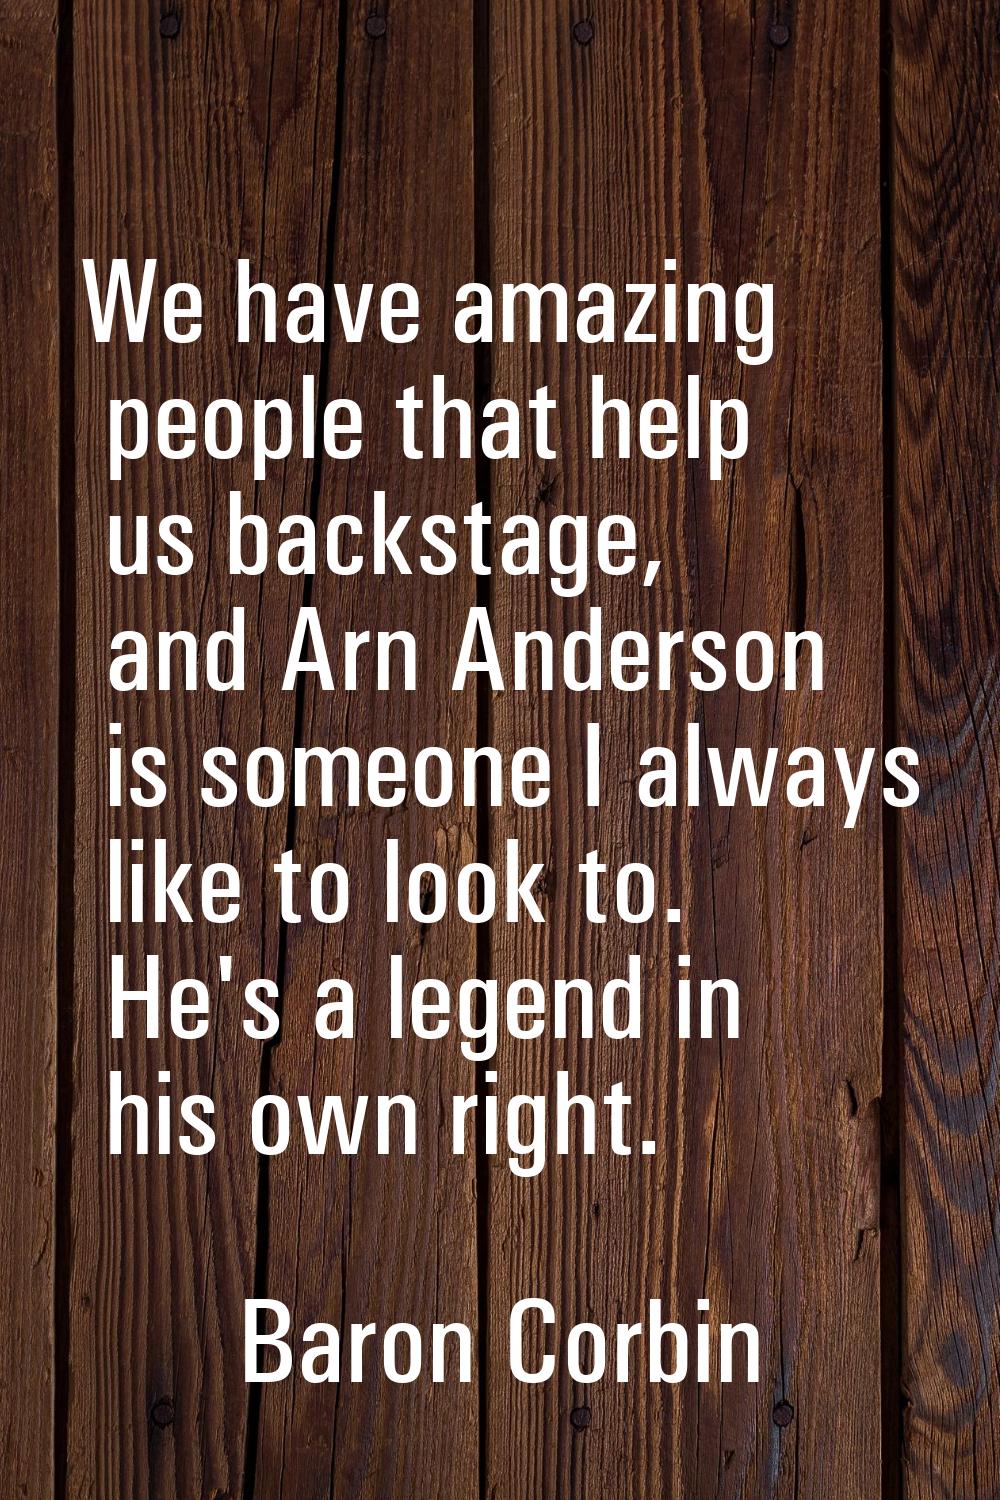 We have amazing people that help us backstage, and Arn Anderson is someone I always like to look to